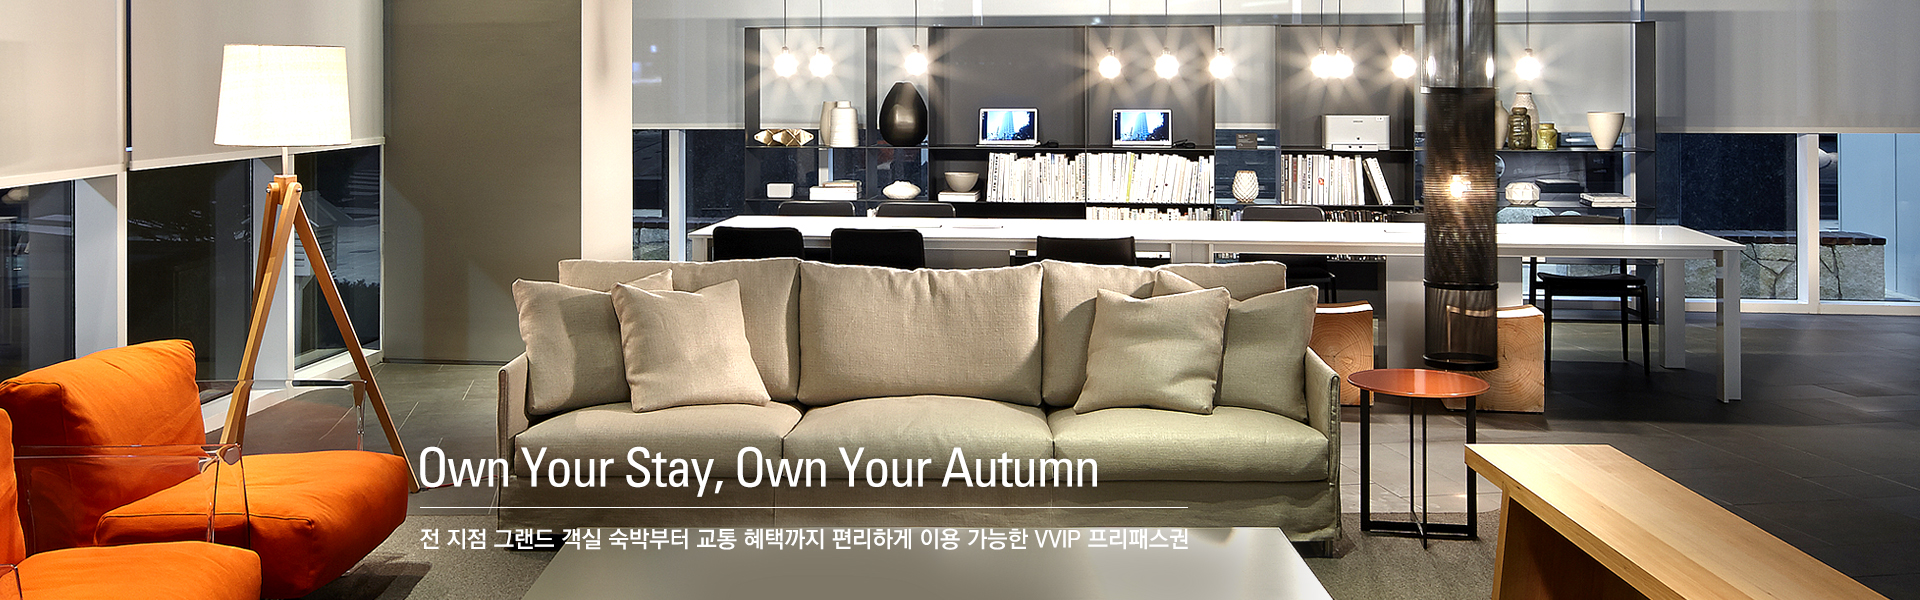 Own Your Stay, Own Your Autumn